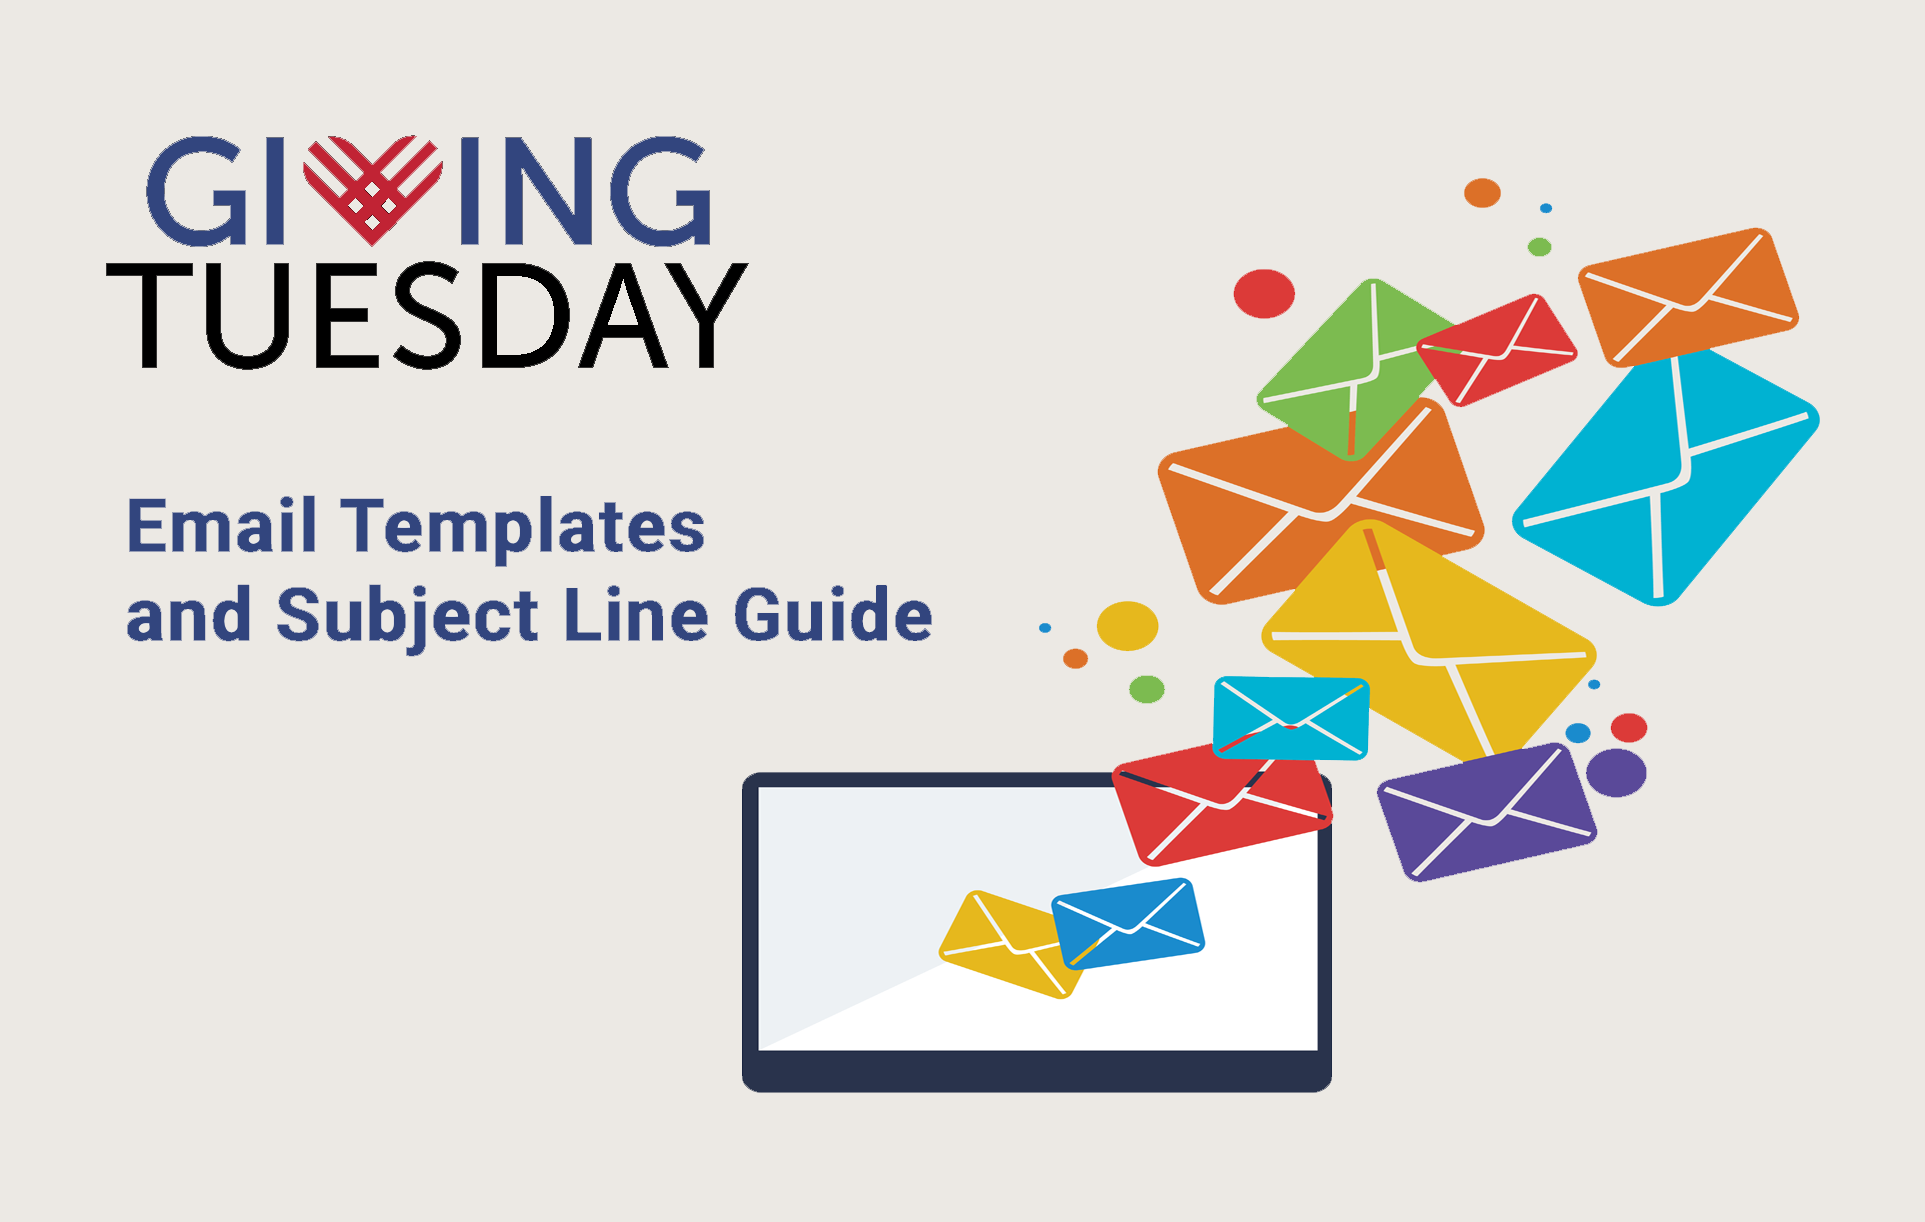 GivingTuesday Email Templates and Subject Line Guide